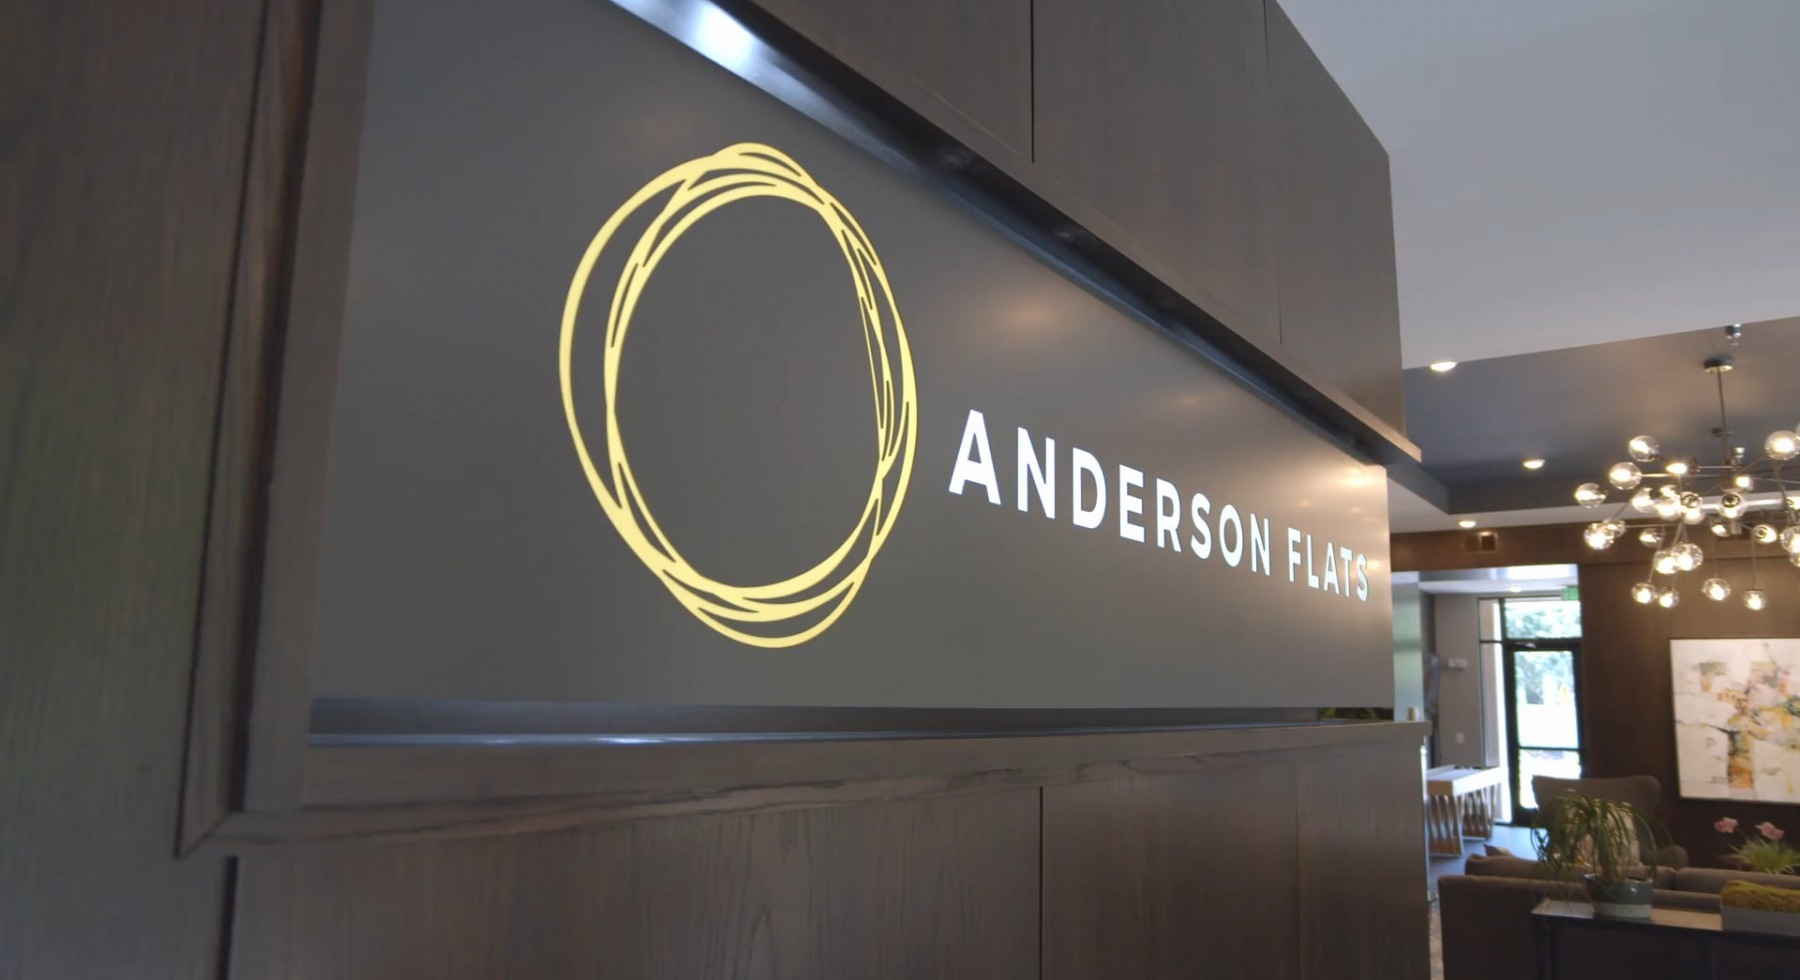 Anderson Flats in a lounge area